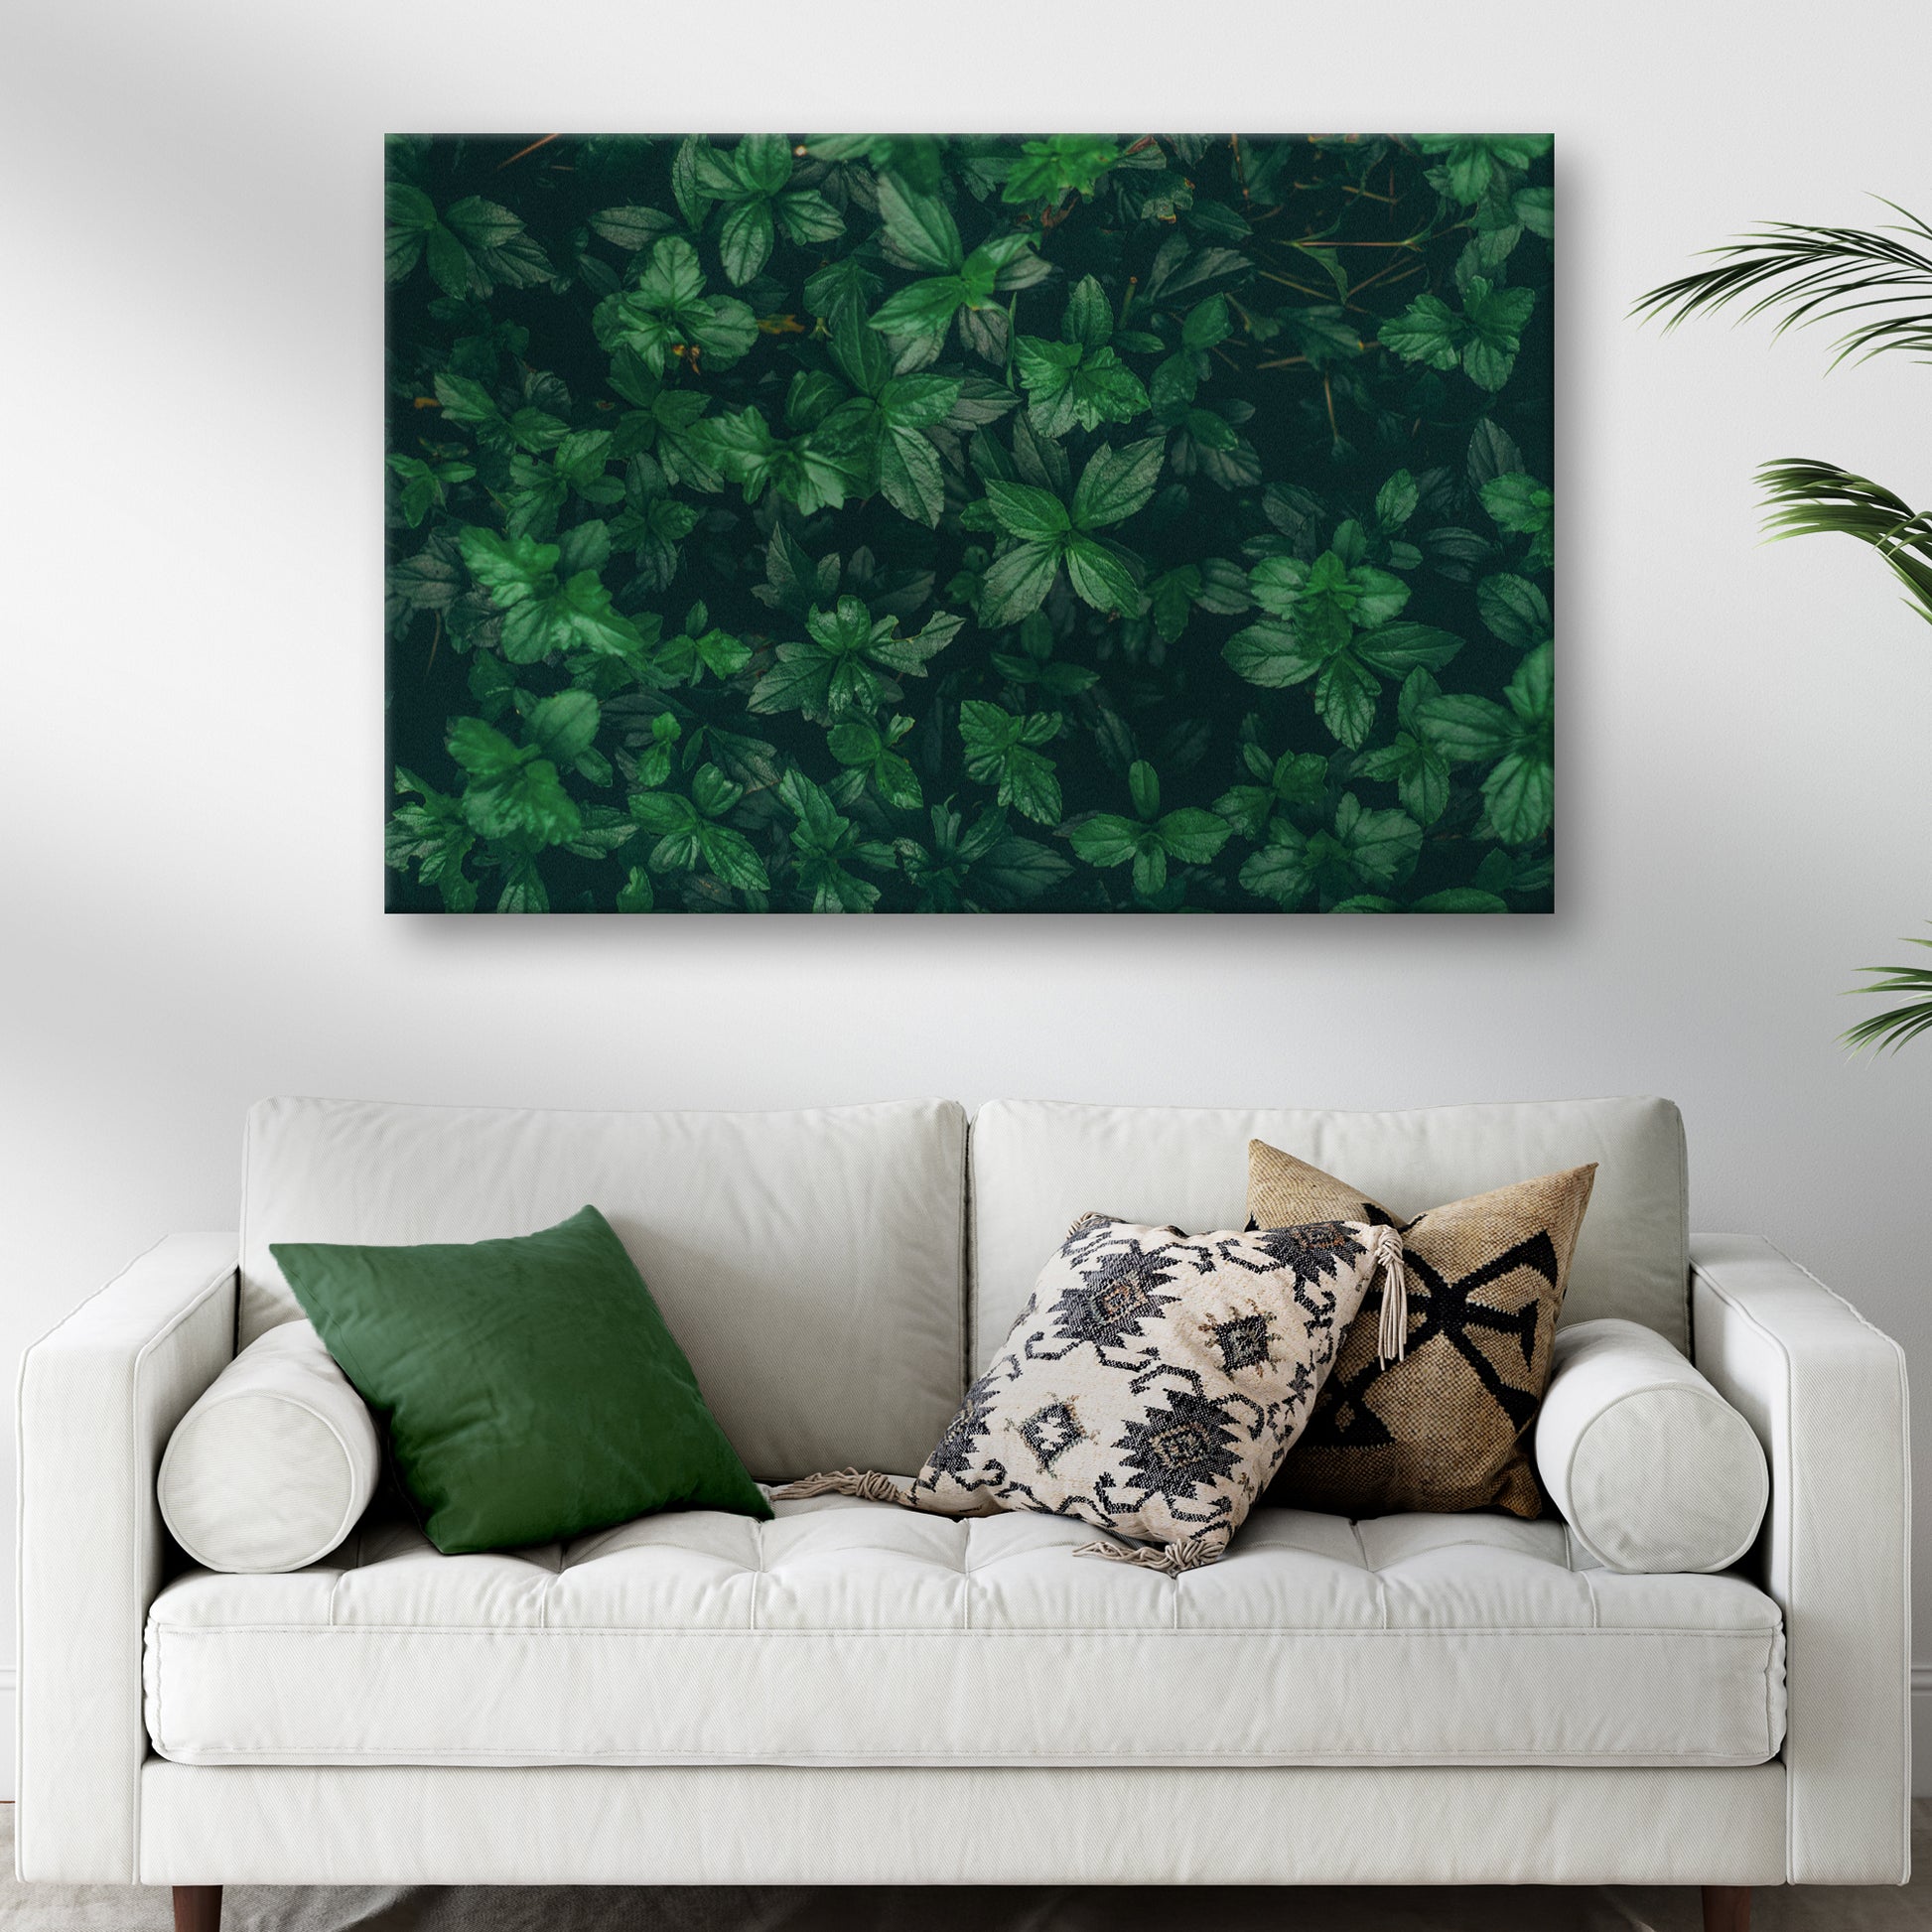 Green Leaves Canvas Wall Art - Image by Tailored Canvases